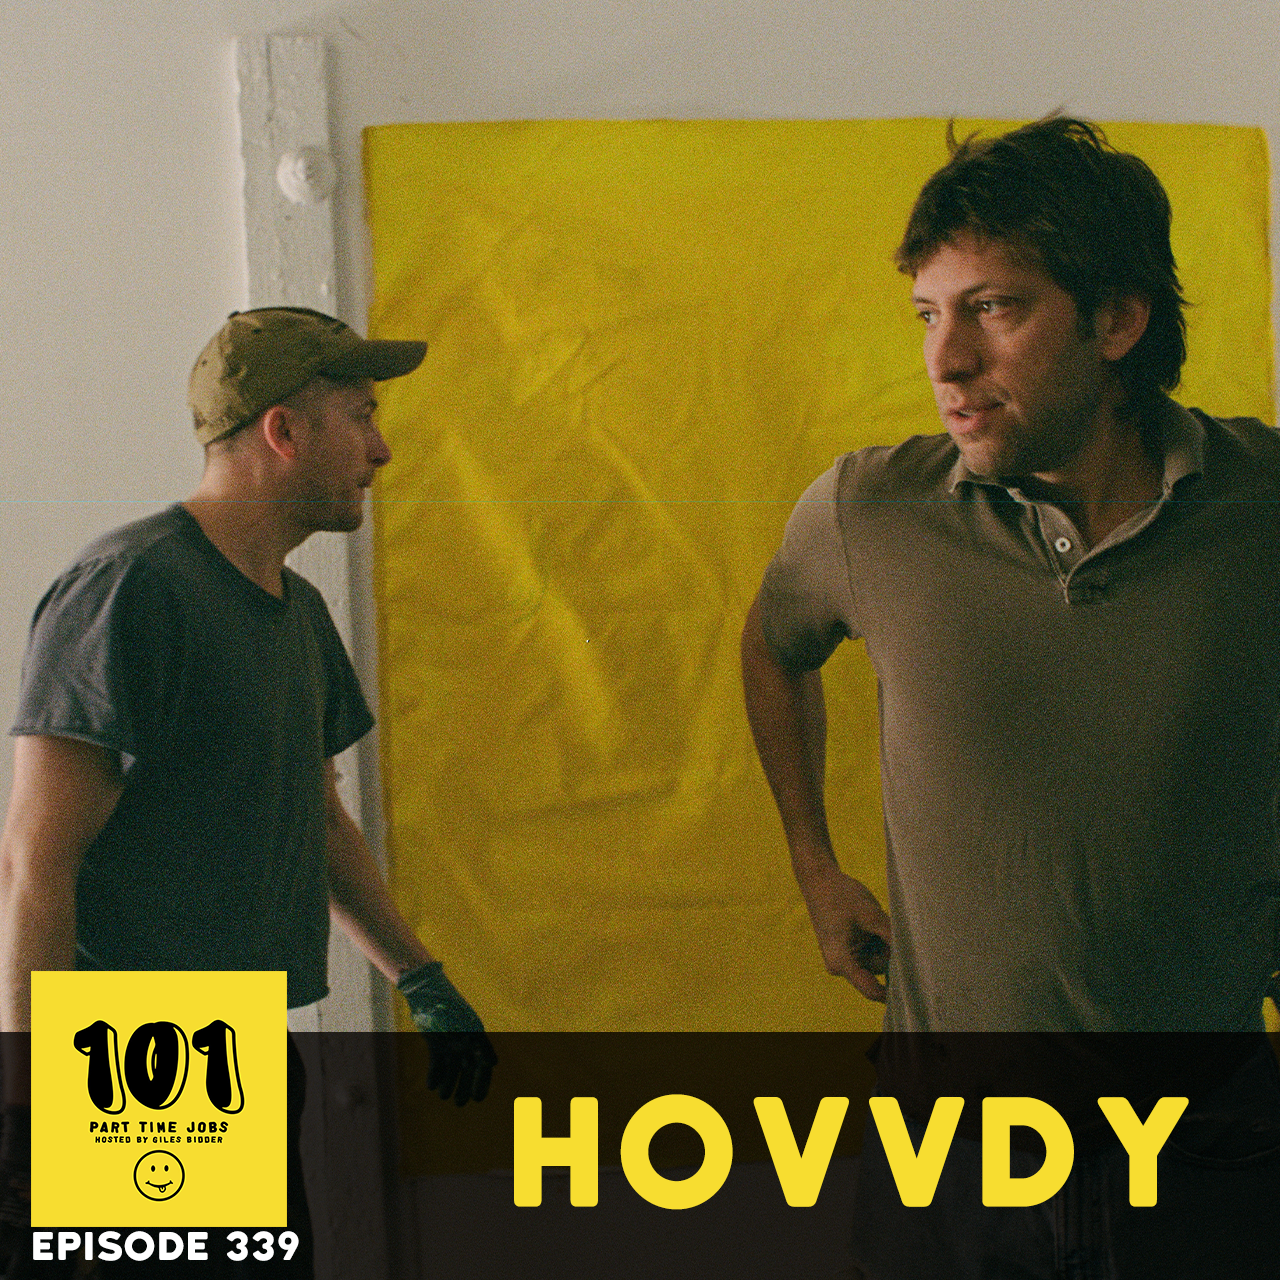 Episode Hovvdy - Power-washing garbage cans